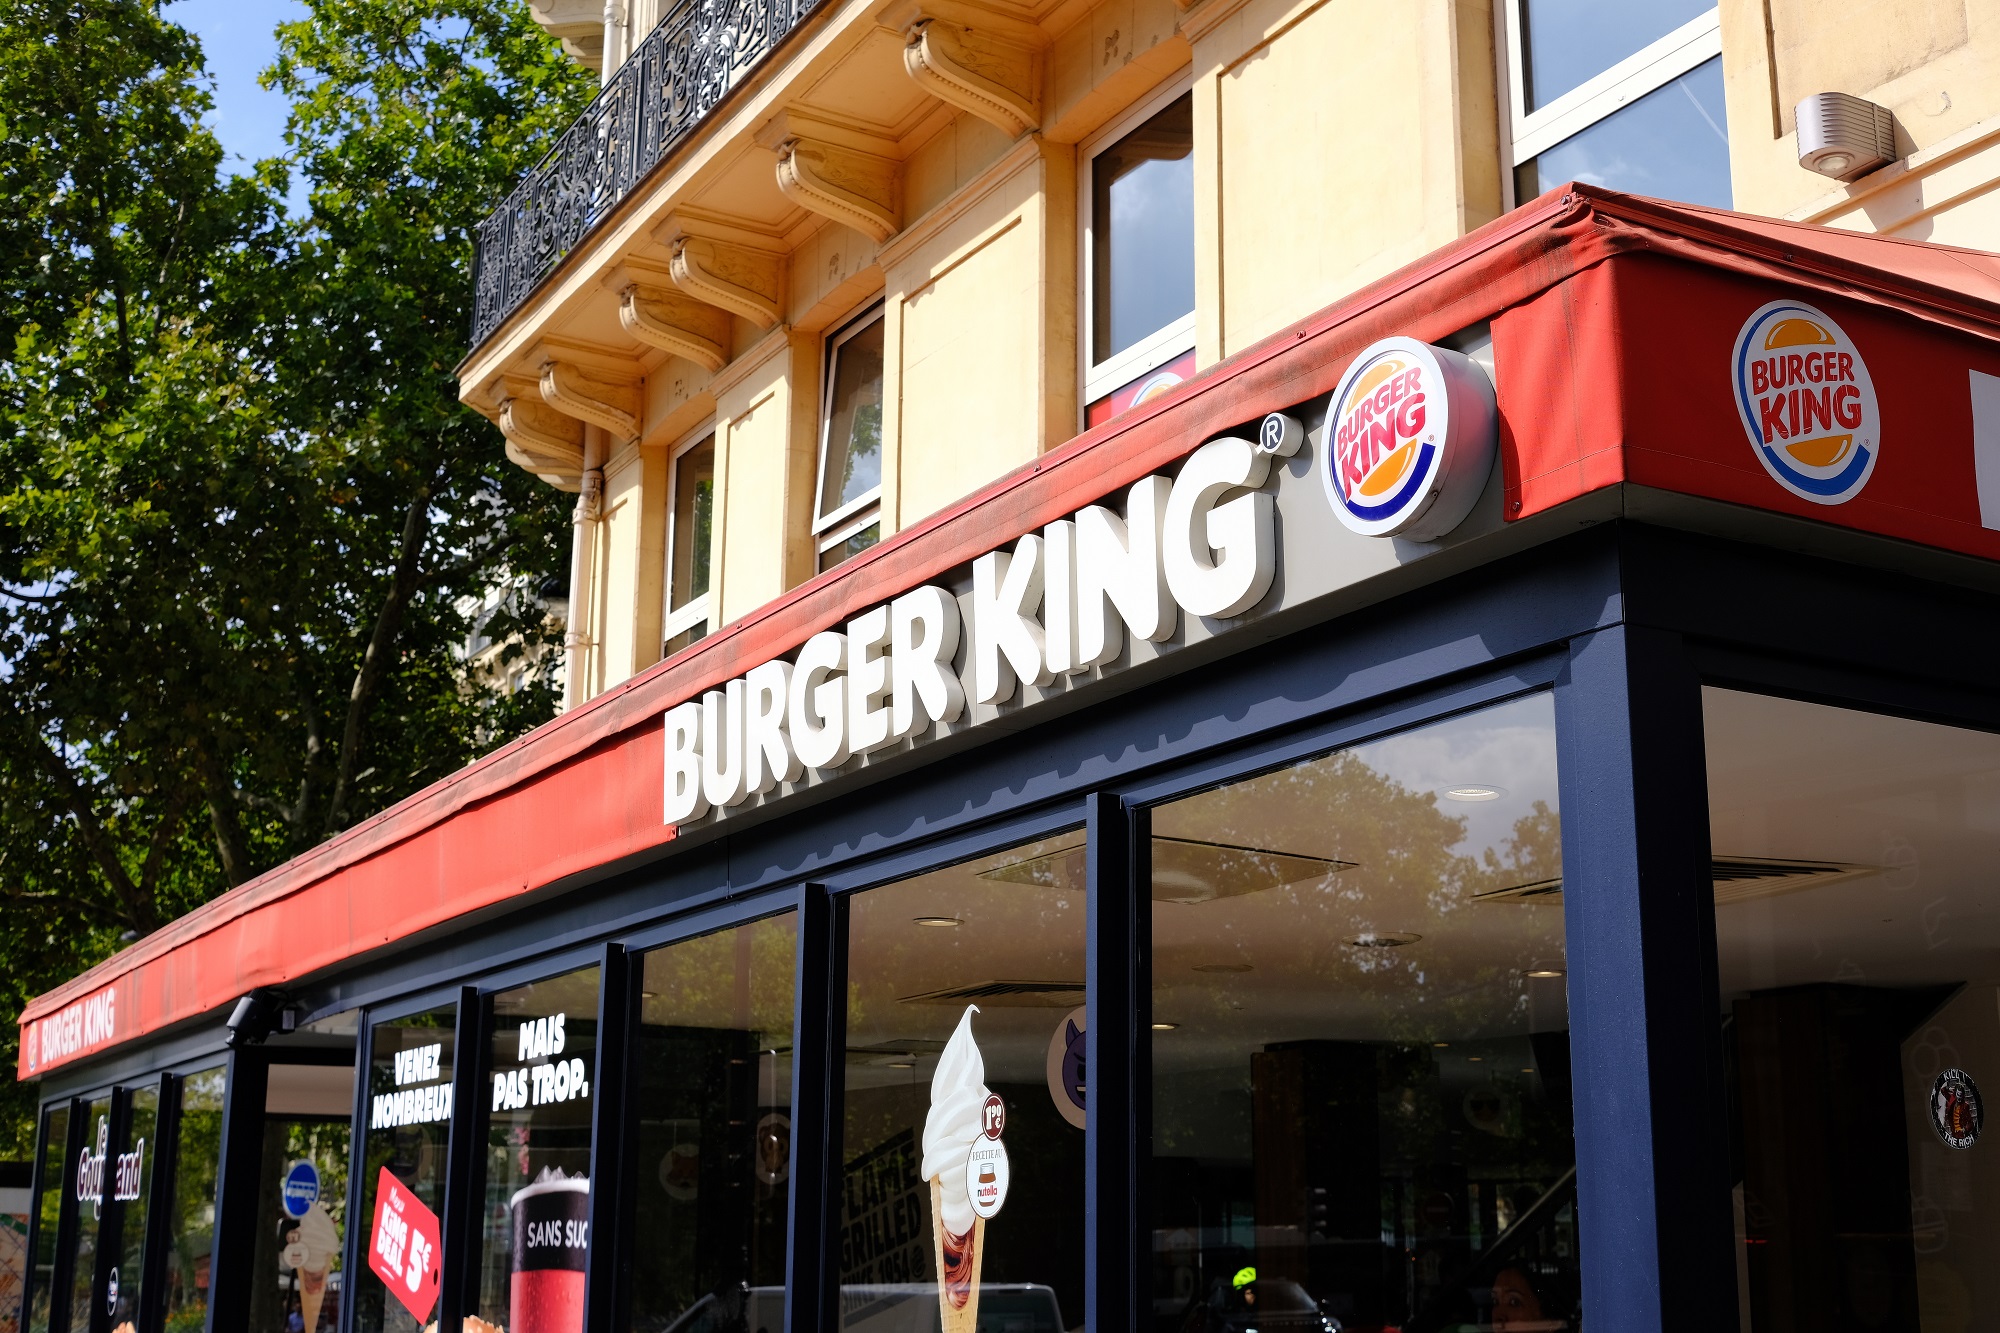 The exterior of a Burger King store in Paris, France.